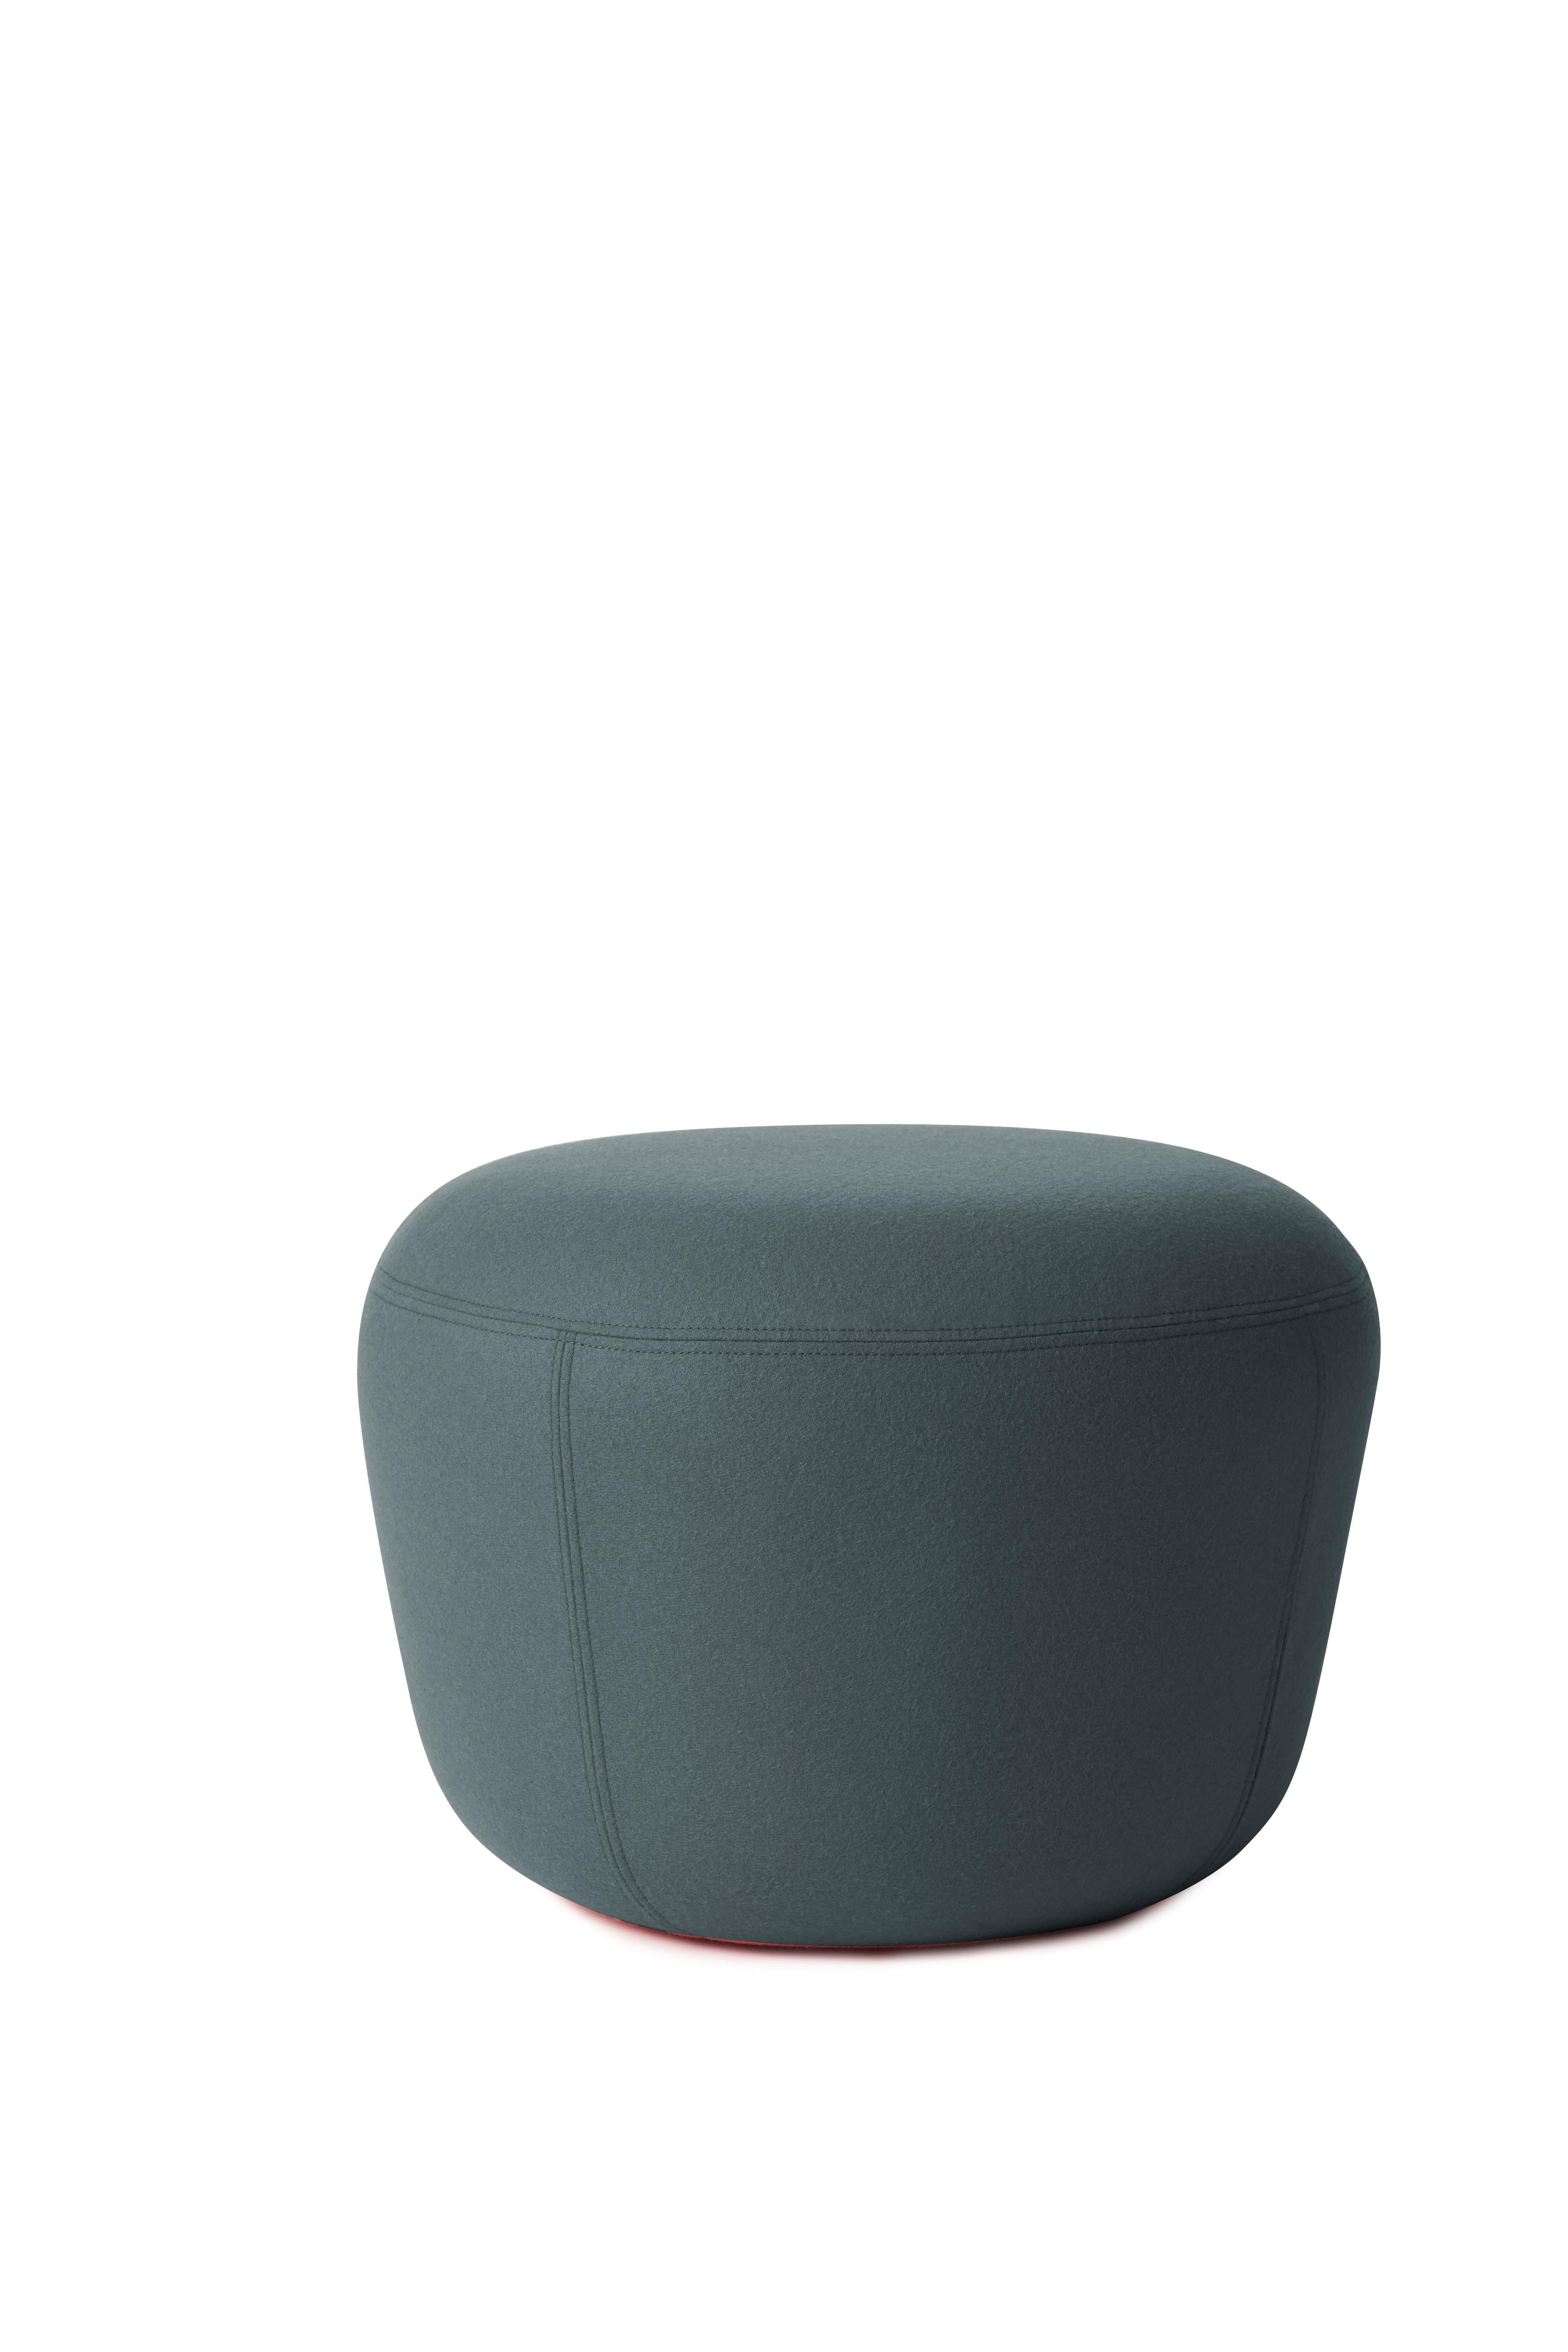 For Sale: Blue (Hero 991) Haven Pouf, by Charlotte Høncke from Warm Nordic